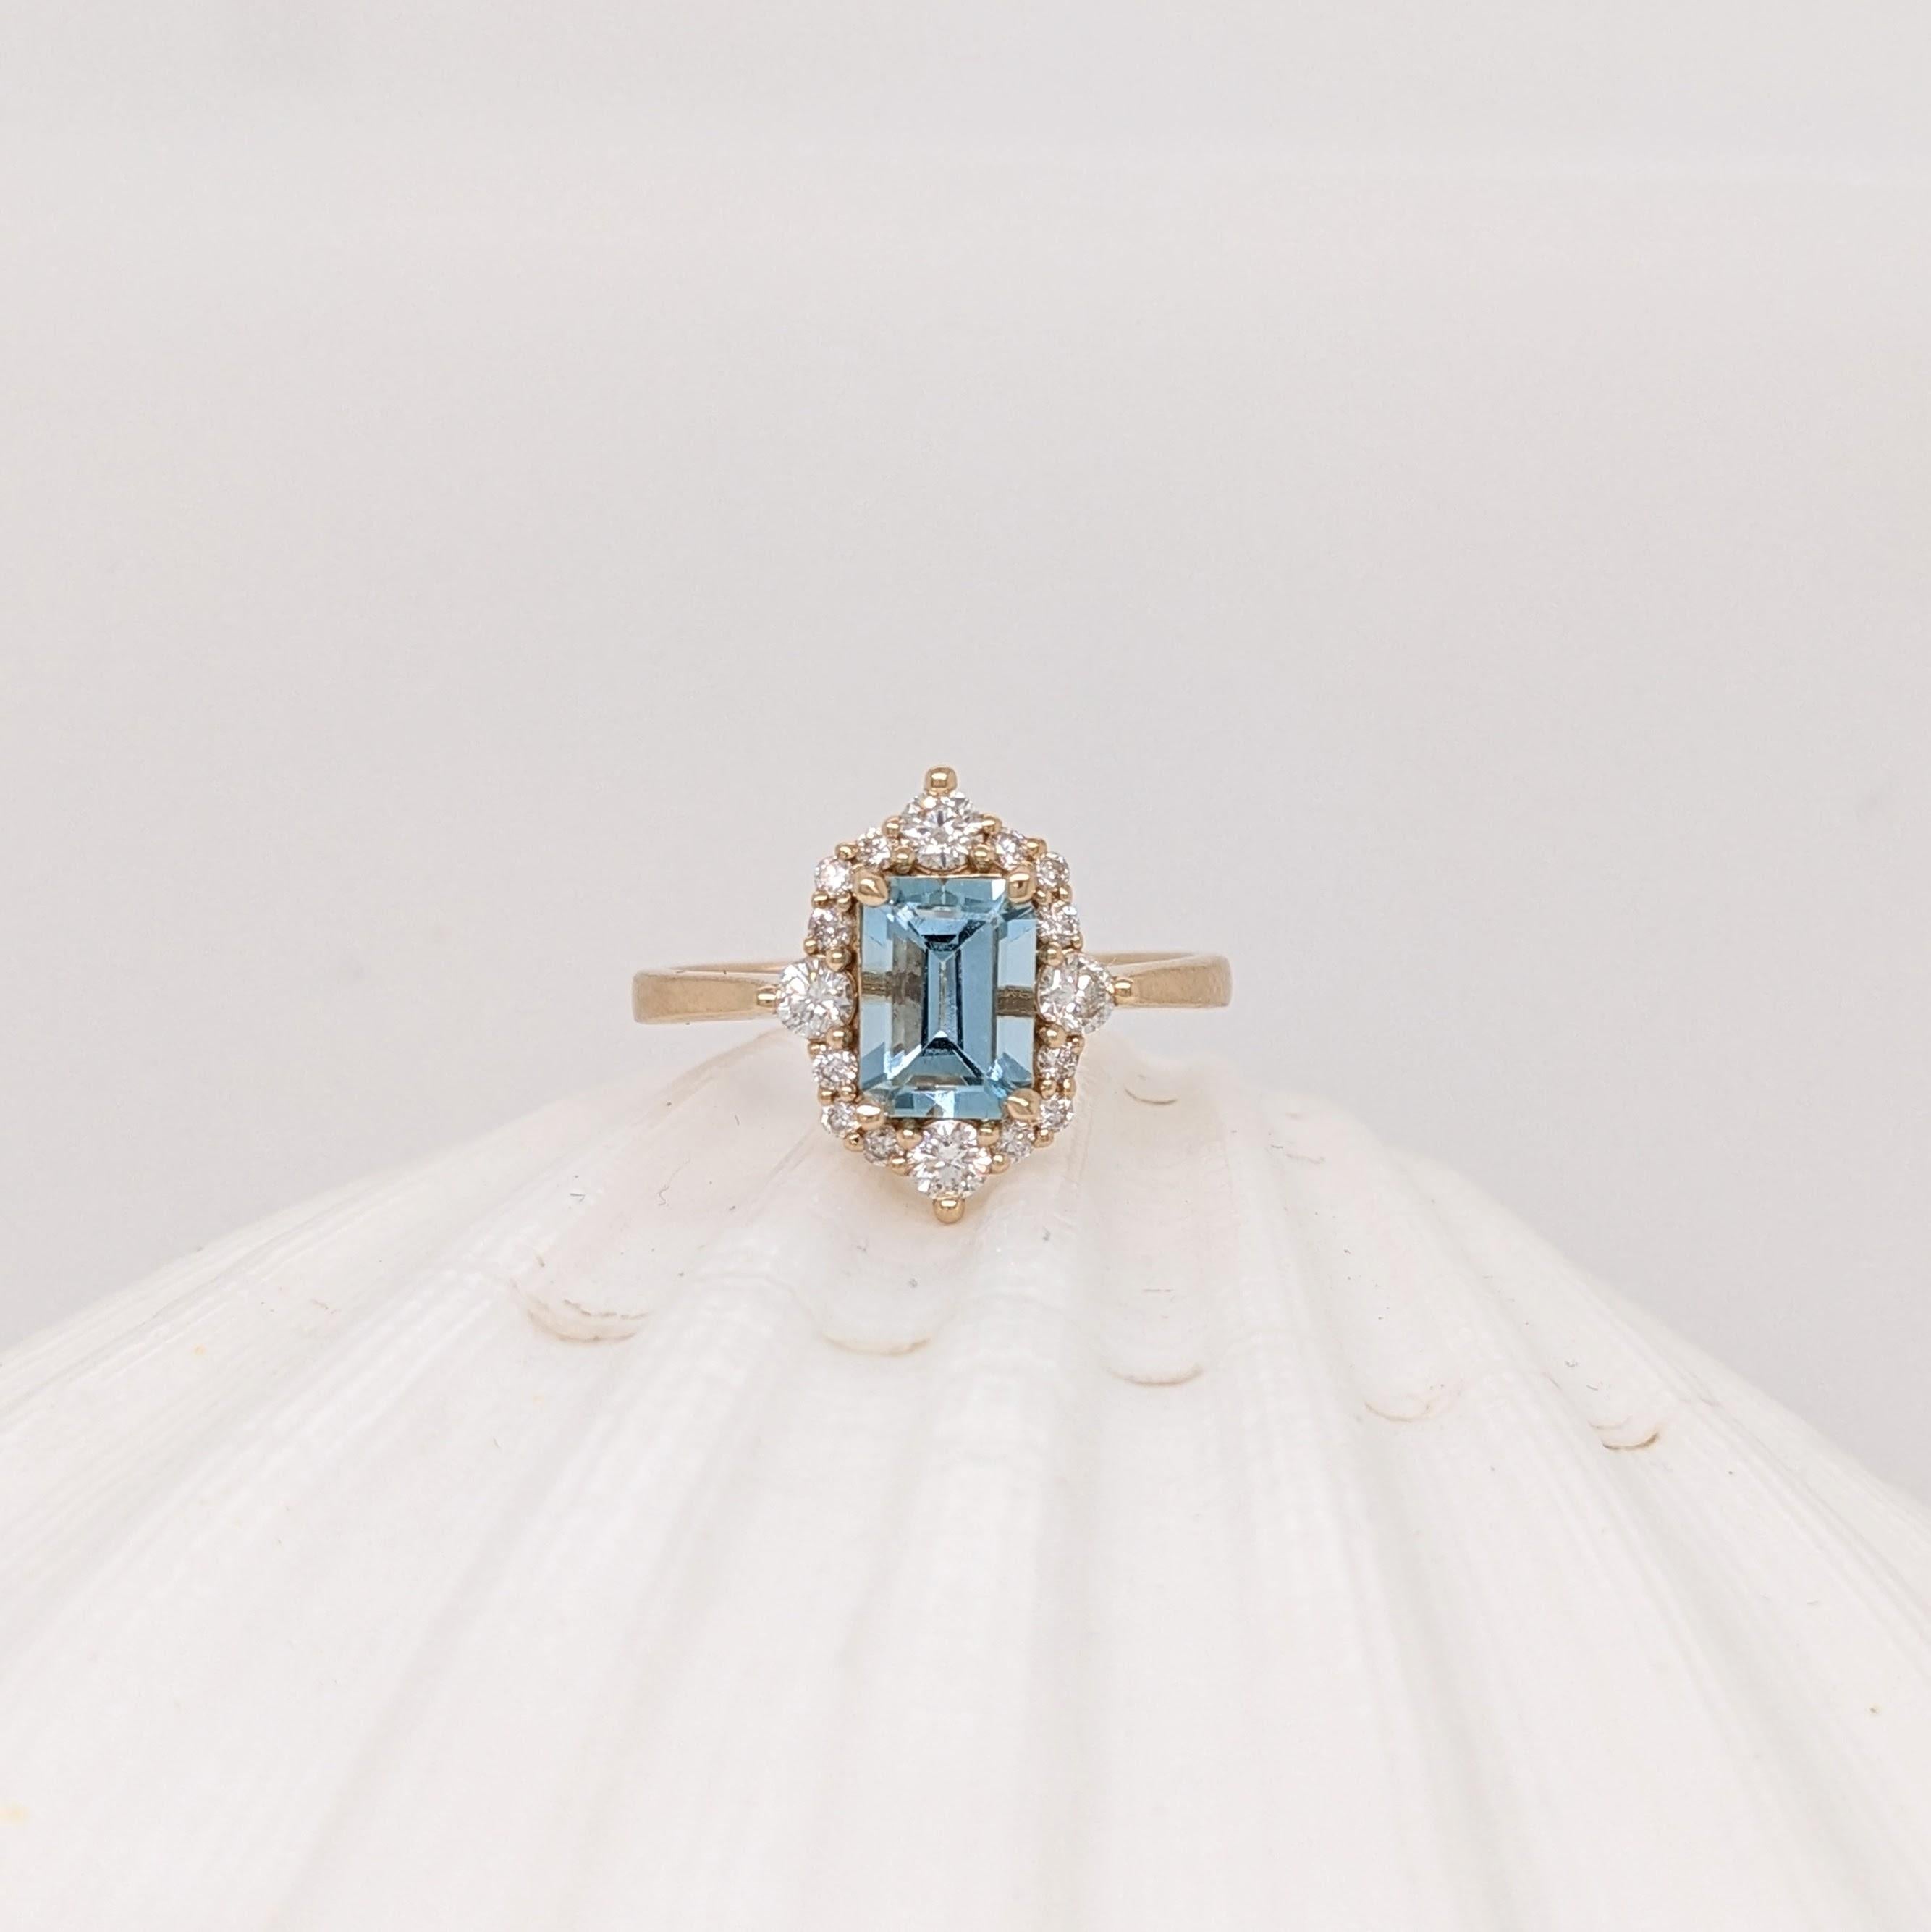 This lovely light blue emerald cut Aquamarine looks beautiful in our custom design NNJ compass rose ring setting with diamond accents in 14k solid yellow Gold. Let this ring remind you of your true north, a perfect symbol of love and trust. A great